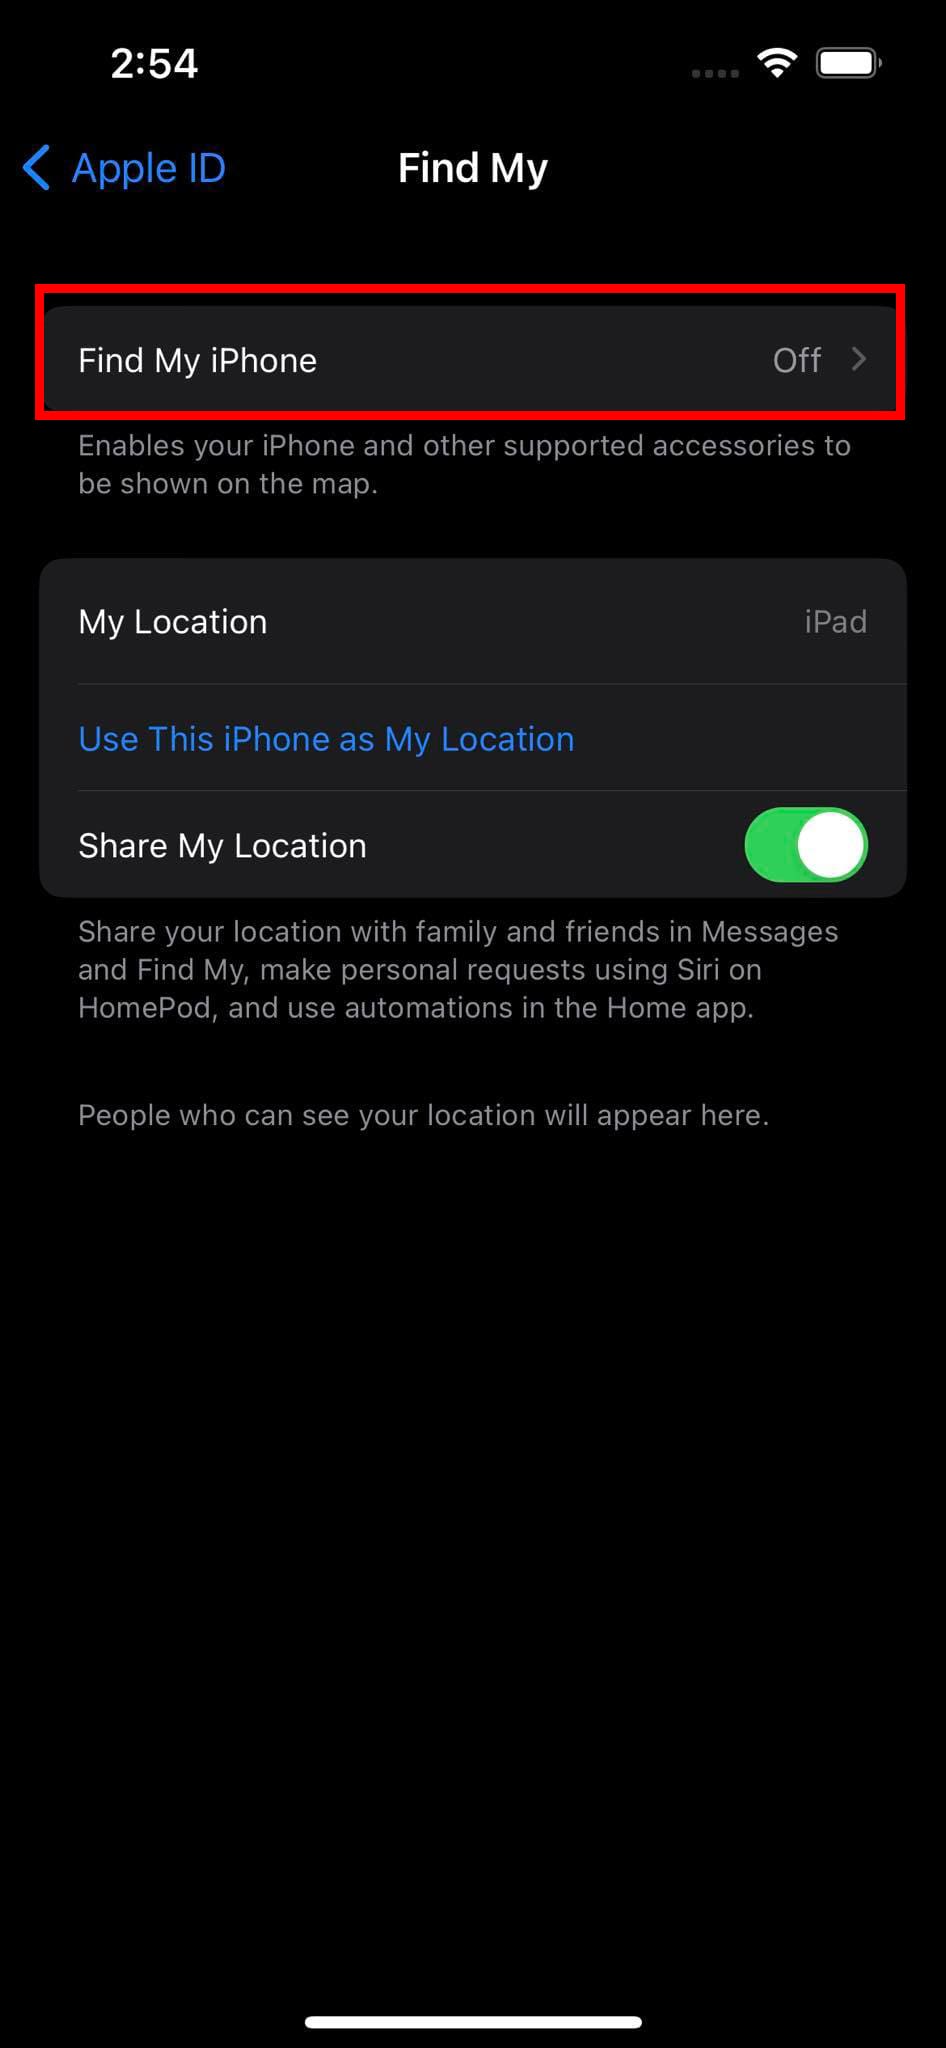 Find My is offline on iPhone